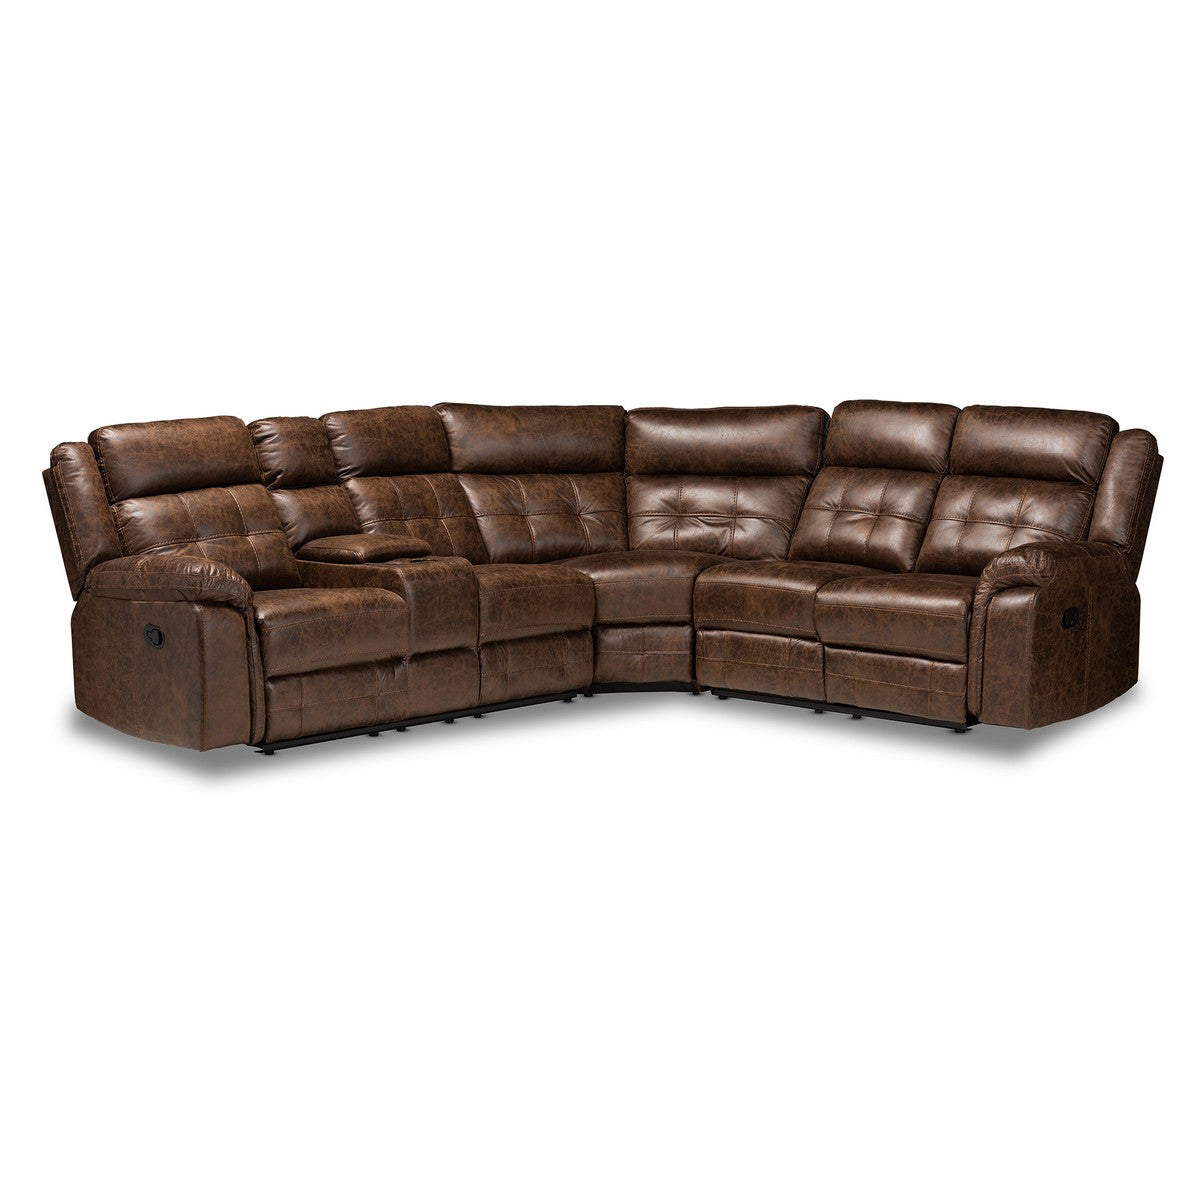 Baxton Studio Vesa Modern and Contemporary Brown Leather-Like Fabric Upholstered 6-Piece Sectional Recliner Sofa with 2 Reclining Seats  Baxton Studio- Sectional Sofas-Minimal And Modern - 1